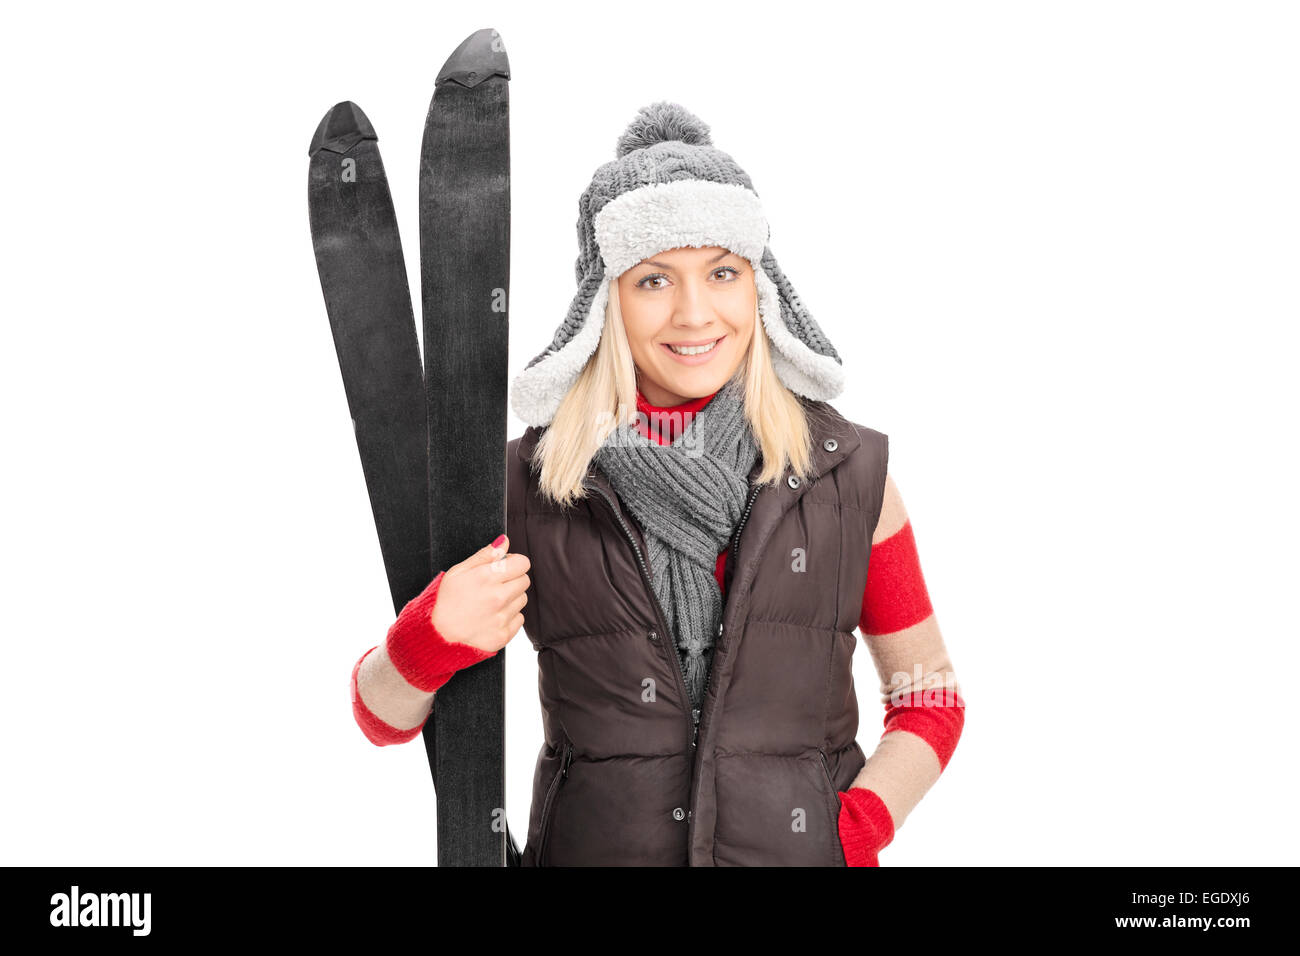 Young girl in winter clothes holding skis isolated on white background Stock Photo